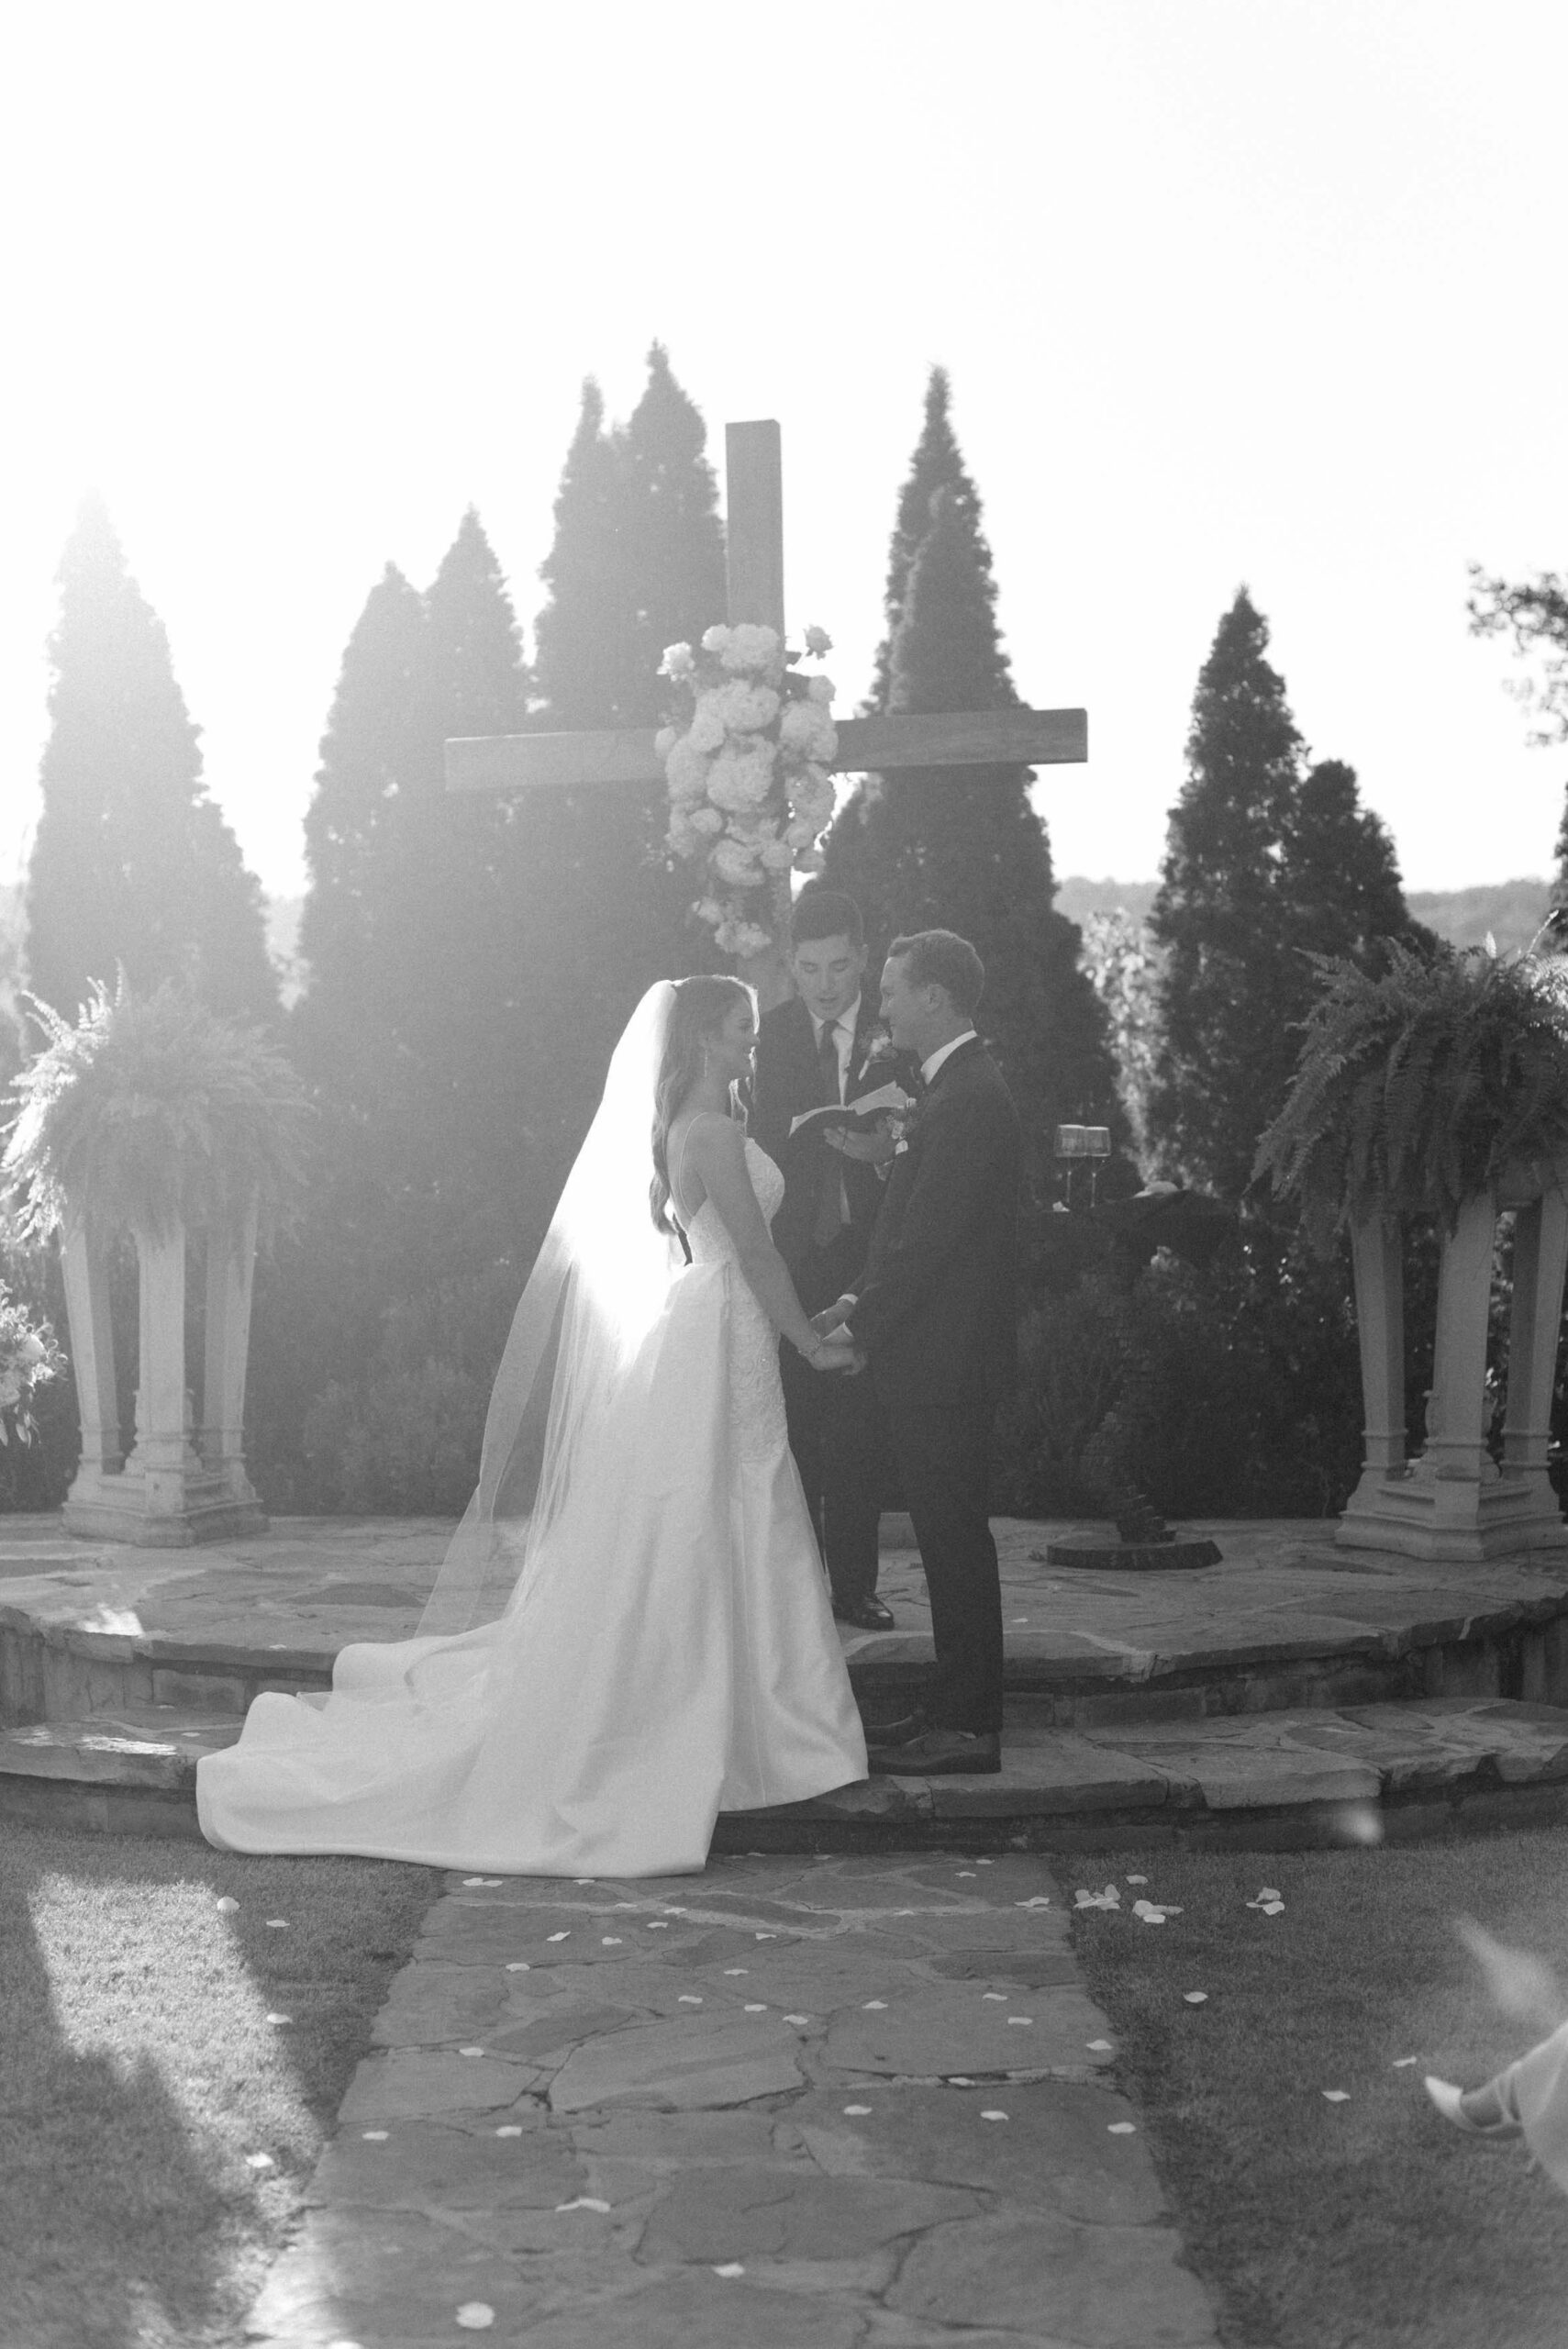 Emotion film edit image of a couple during their ceremony exchanging wedding vows, black and white photo by Olivia Joy Photography at Park Crest Events wedding venue in Hoover, AL